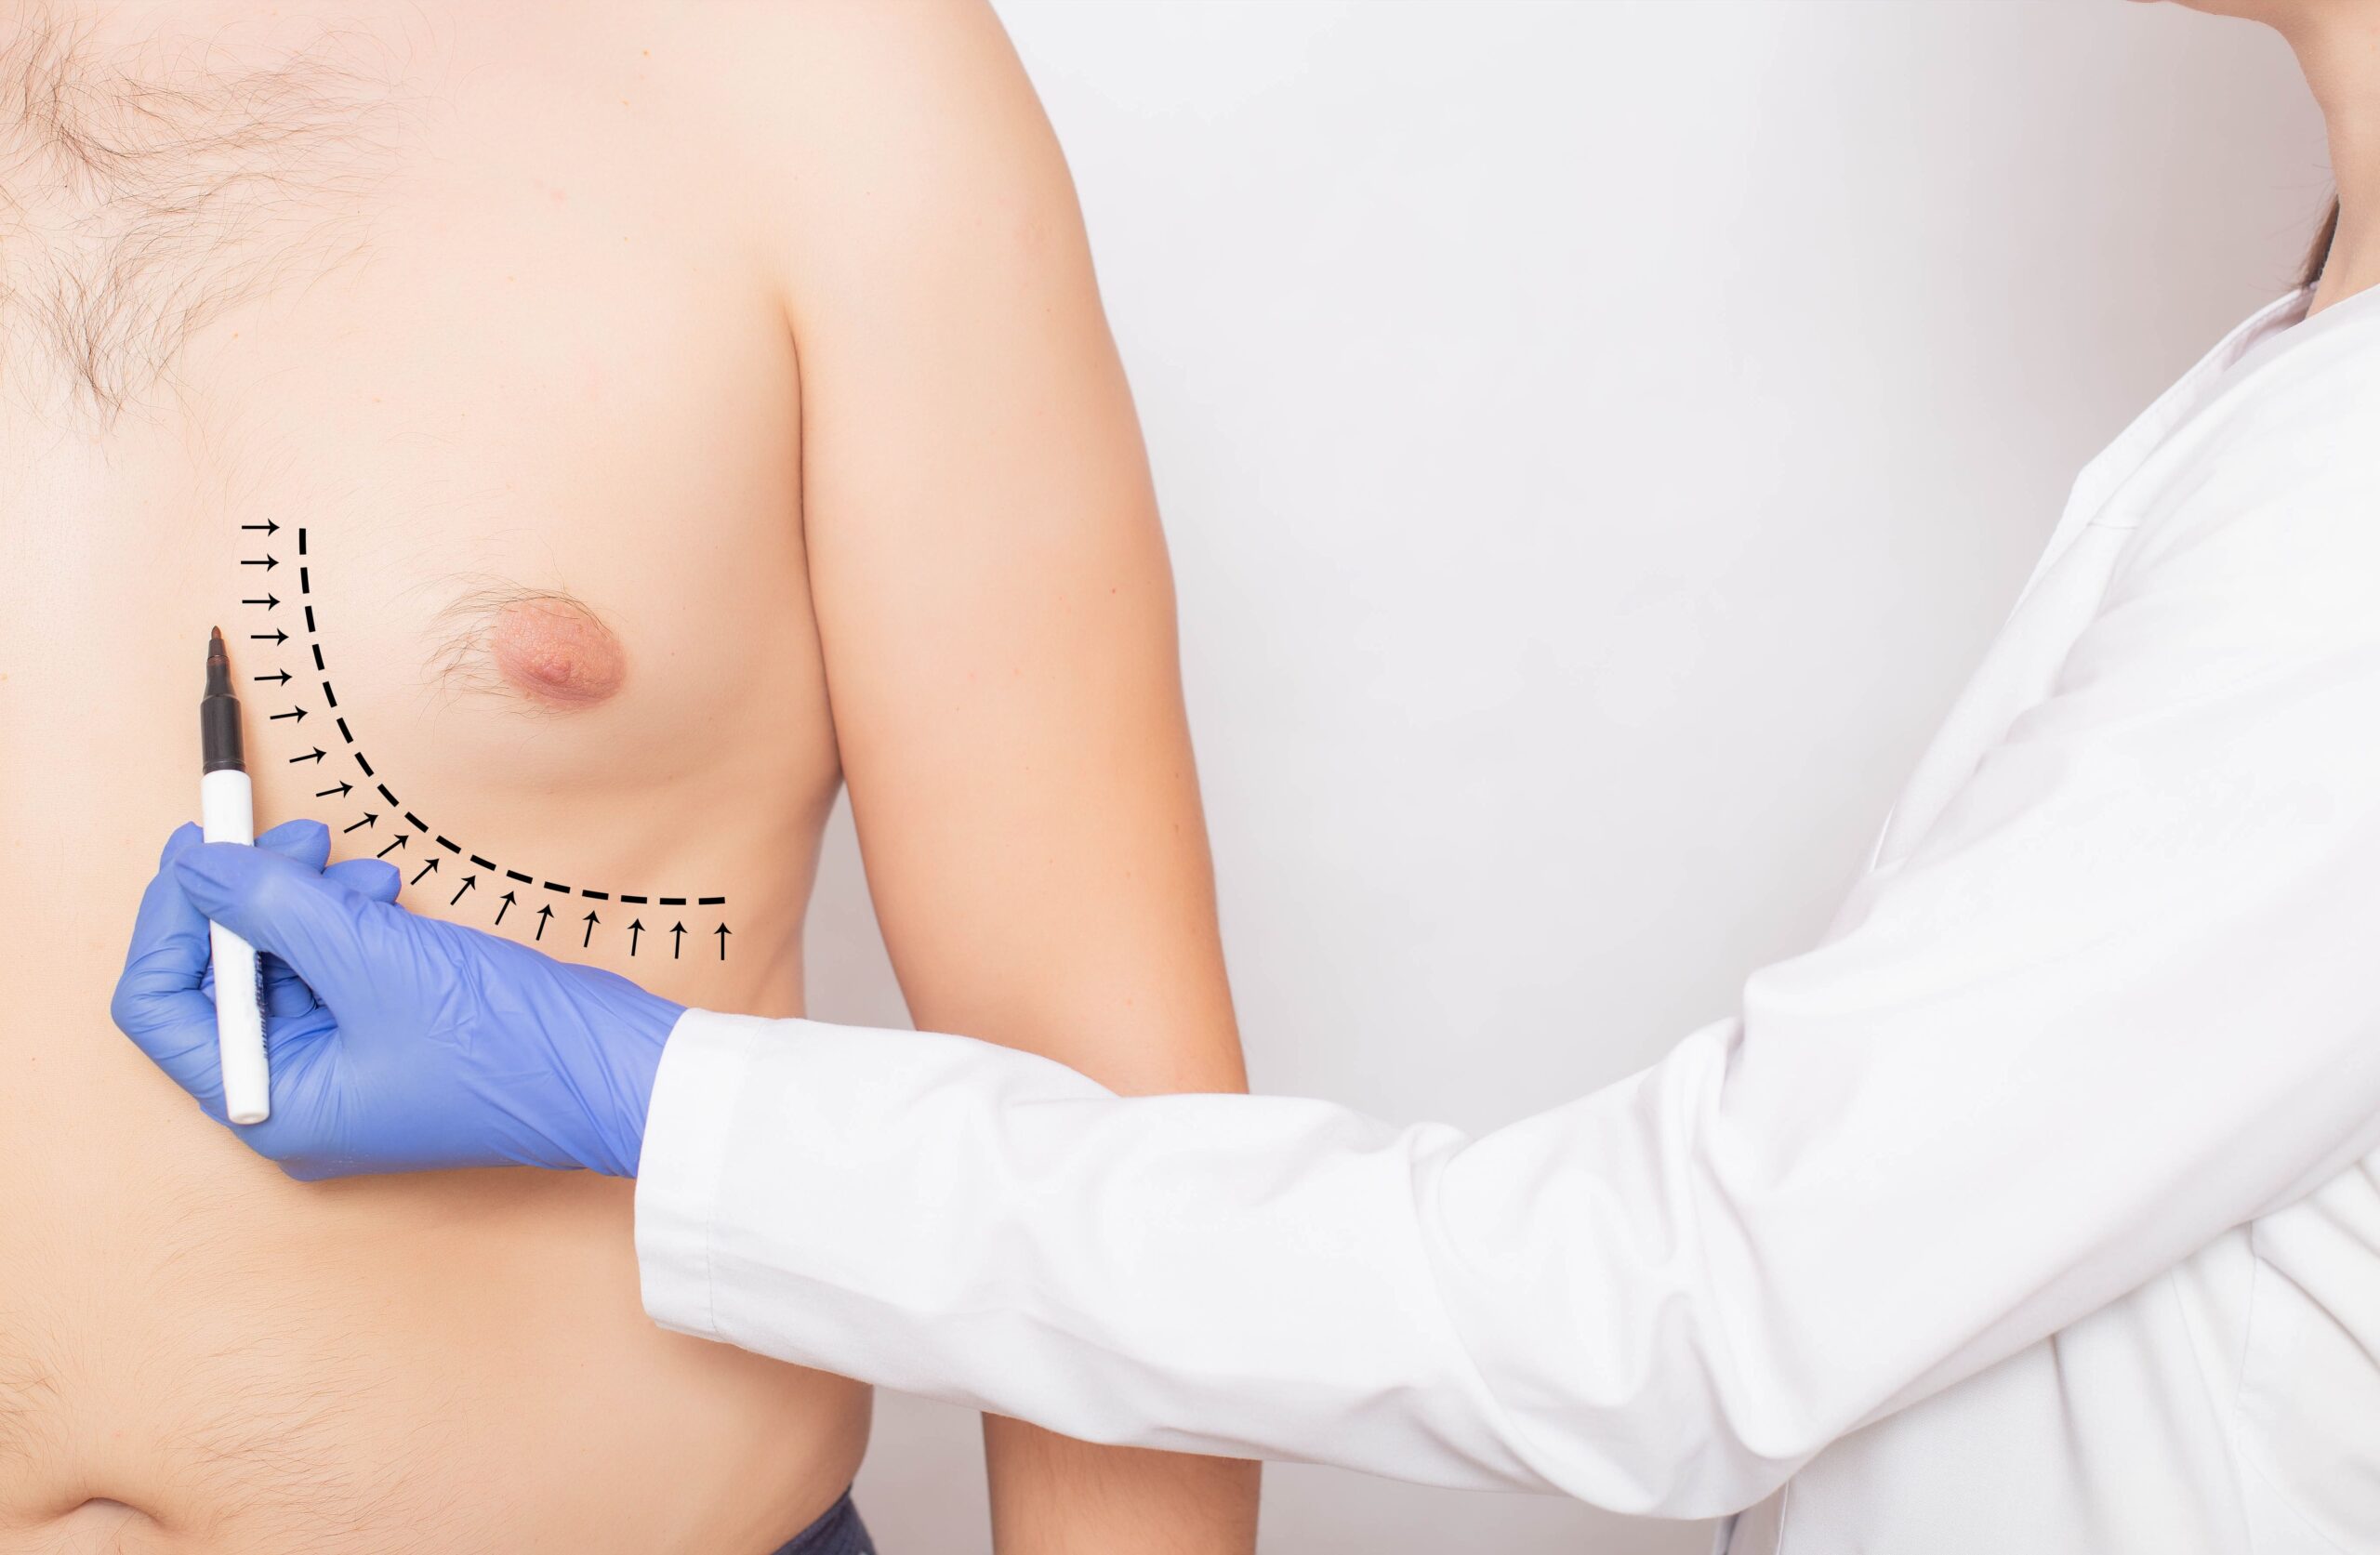 Man boobs, gyno or moobs: What do you call male breasts? - LA